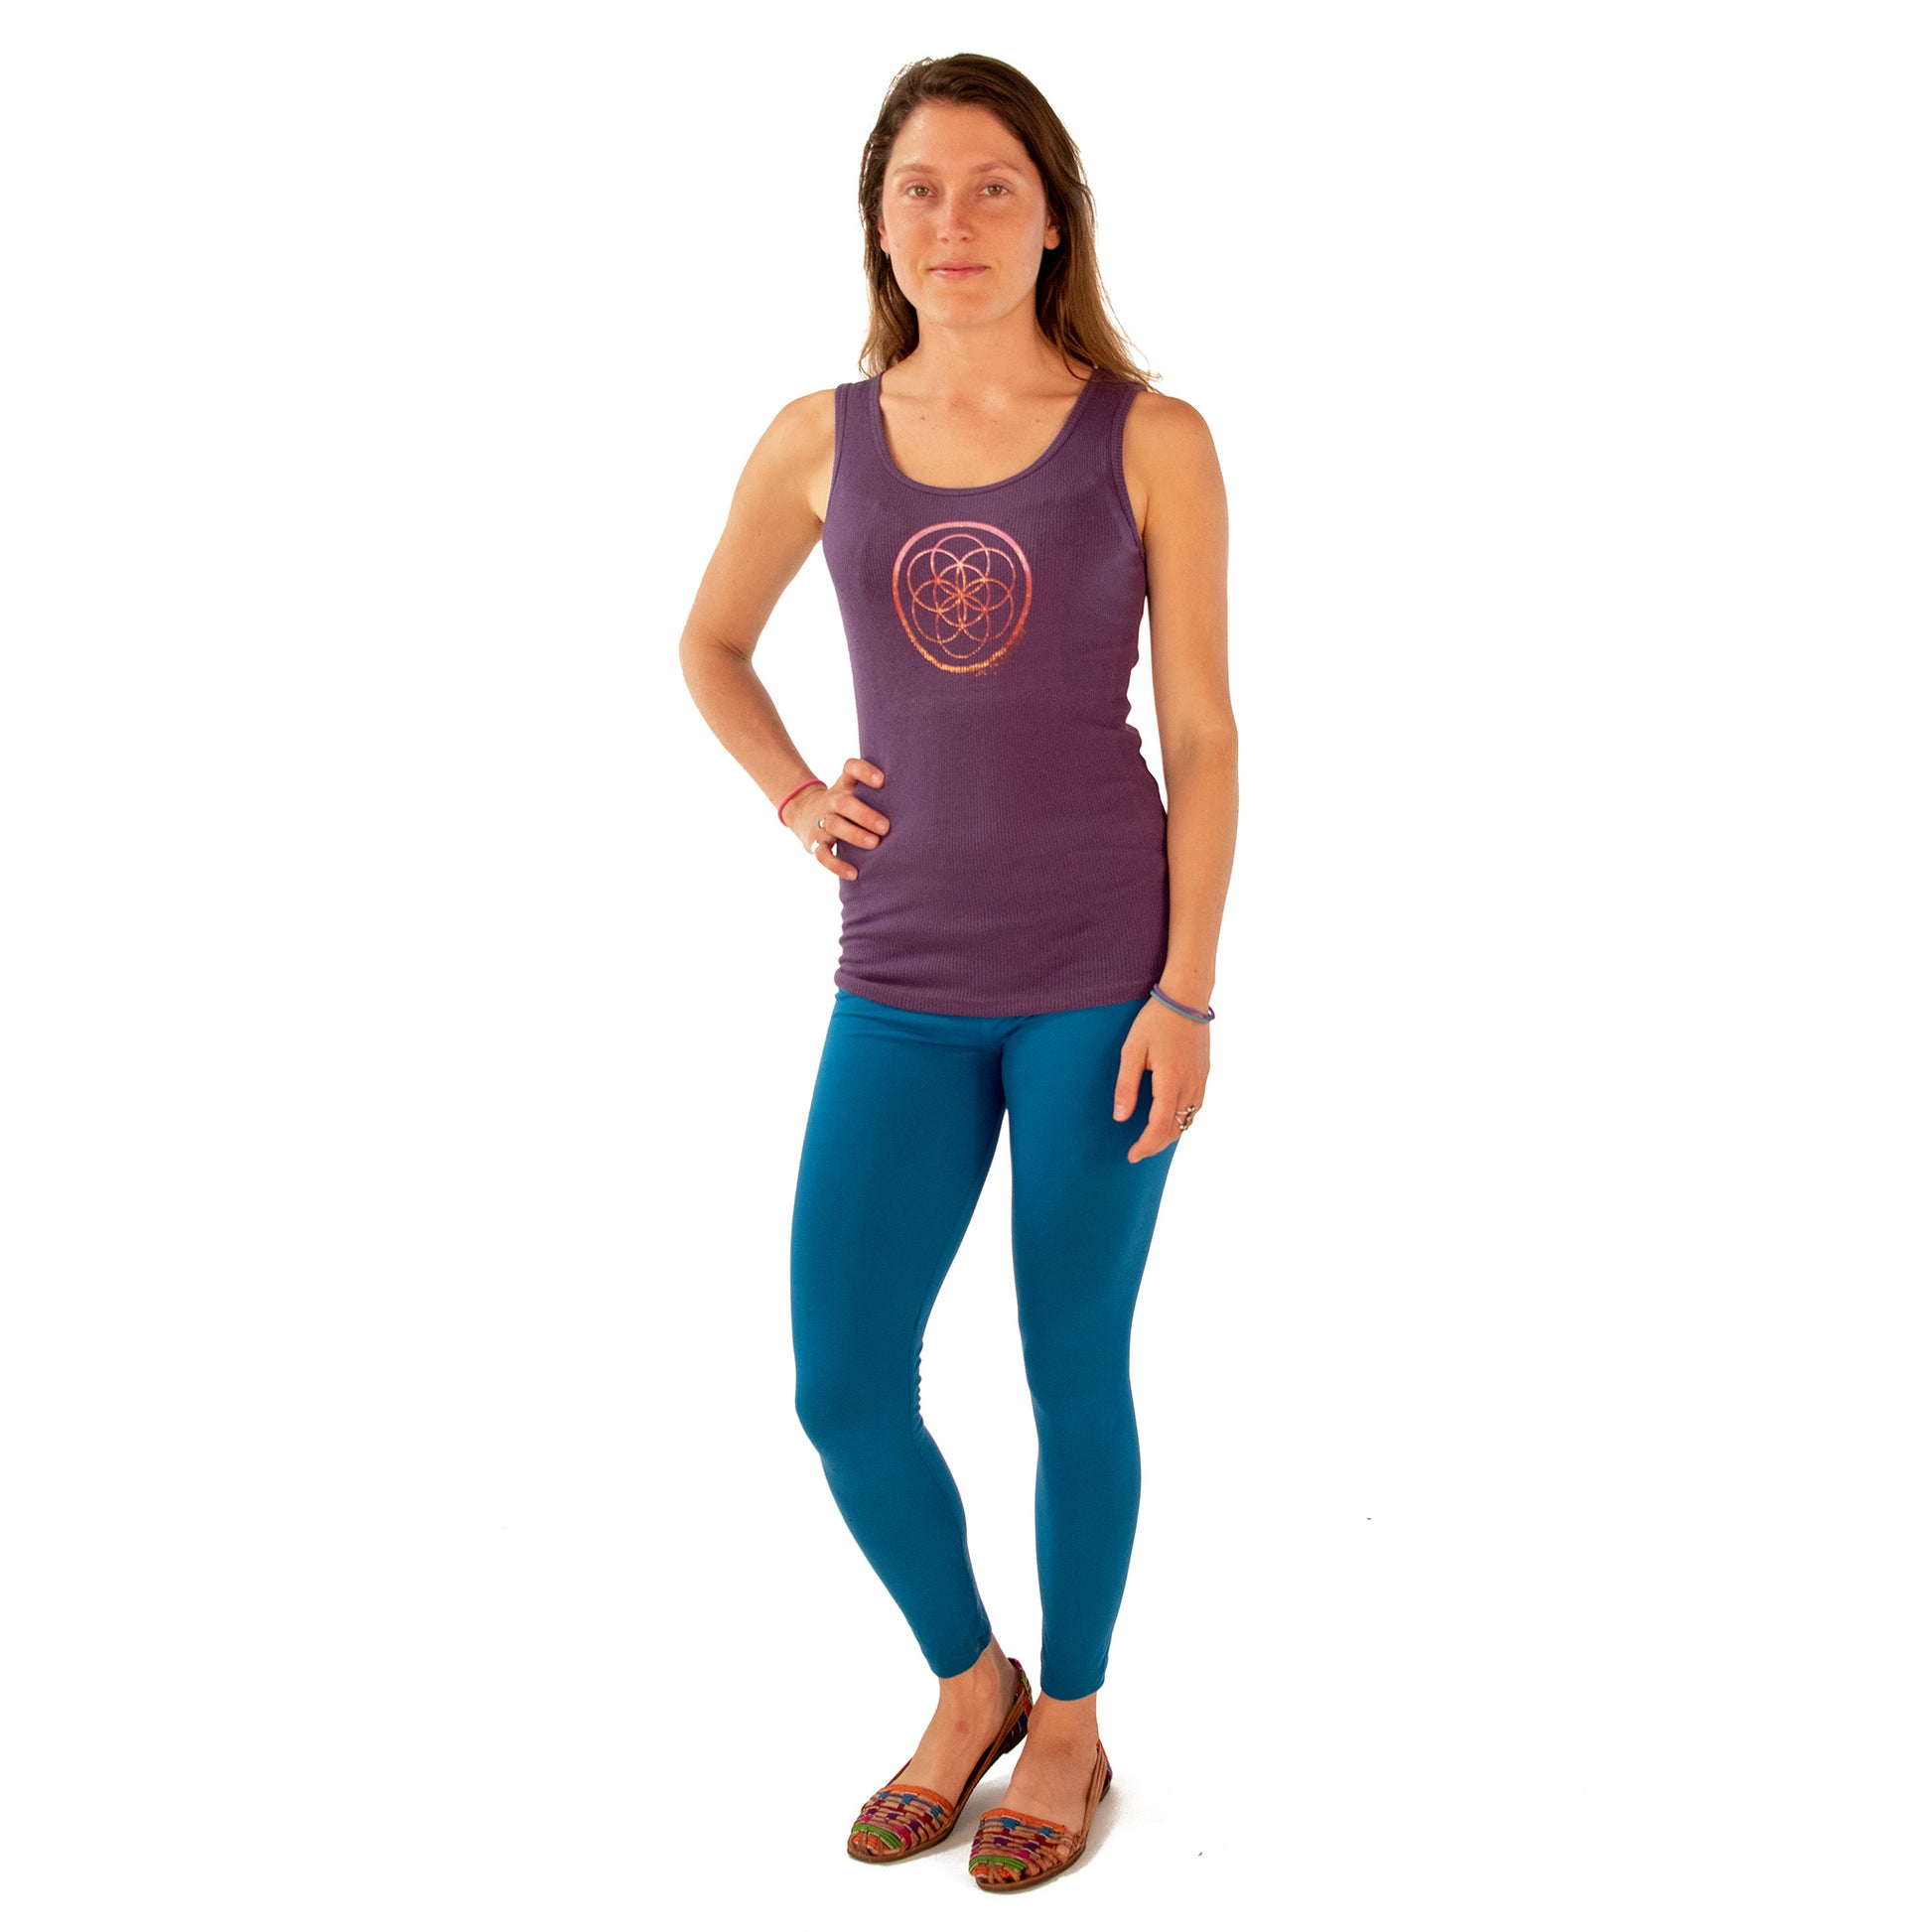 The Spinsterz - The Spinsterz Logo Tank Top